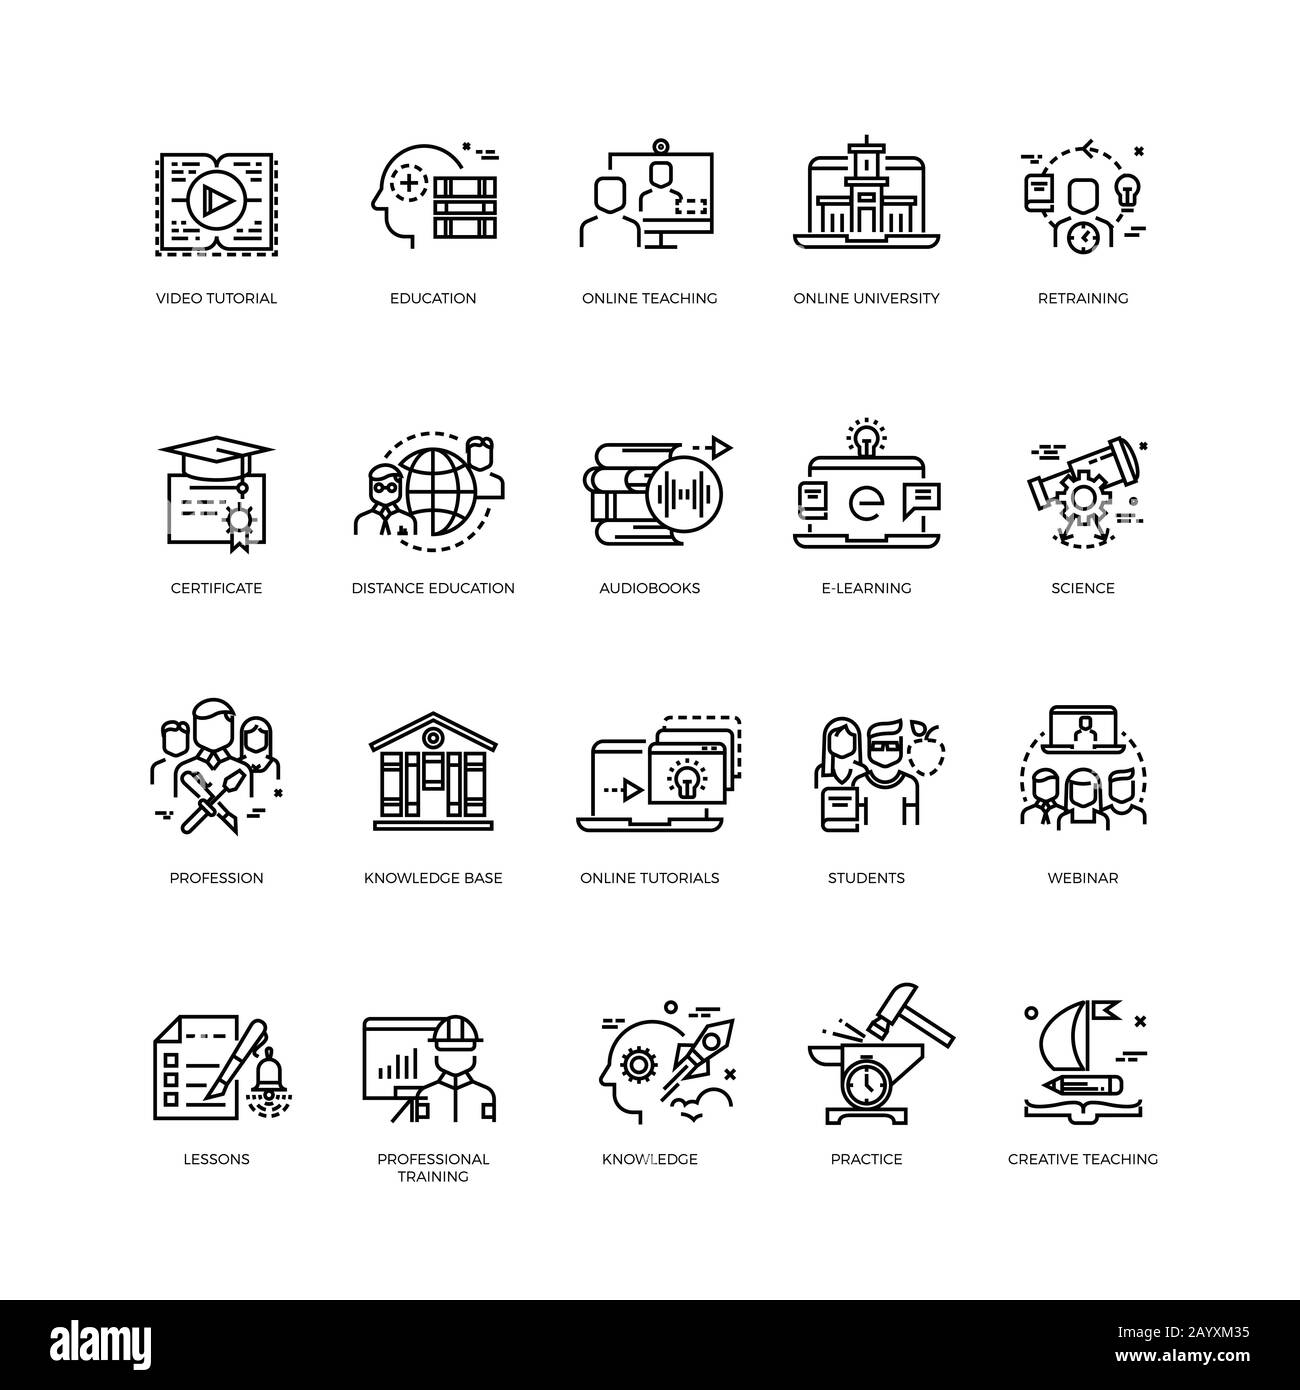 Video tutorials, training courses, online education vector line icons set. Education concept training and education science illustration Stock Vector